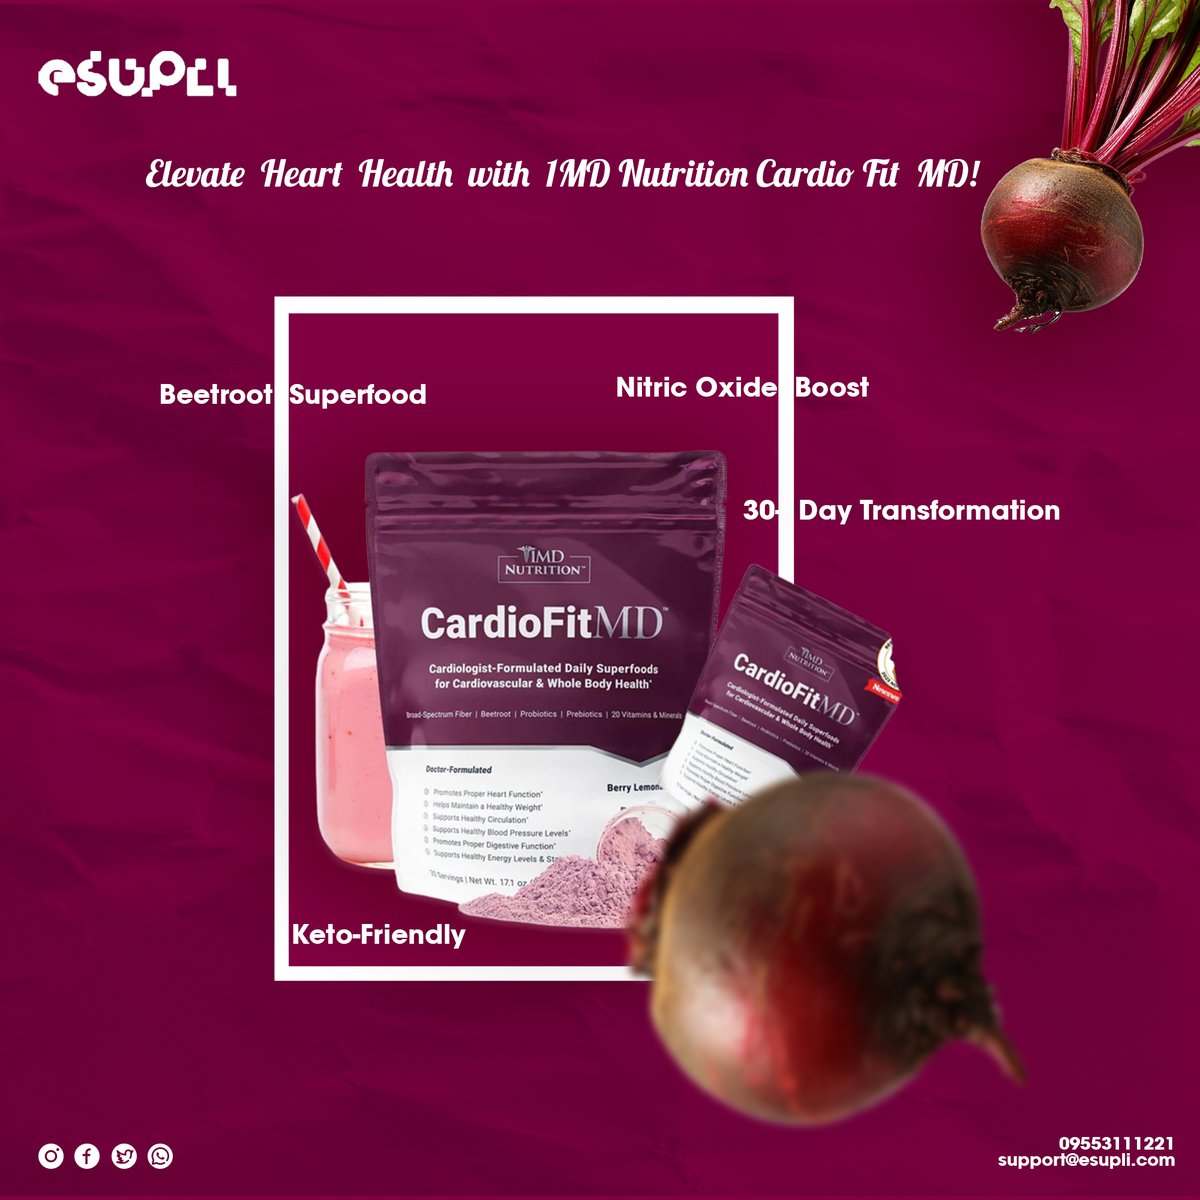 Your heart's best friend in a scoop. Simple, effective, and focused on results.
esupli.com/products/1md-n…
.
.
.
#esupli #1MDNutrition #hearthealth #beetrootmagic #healthyheart #nitricoxide #SuperFoodSupplement #ketofriendly #vegansuperfood #DietaryHealth #HealthJourney